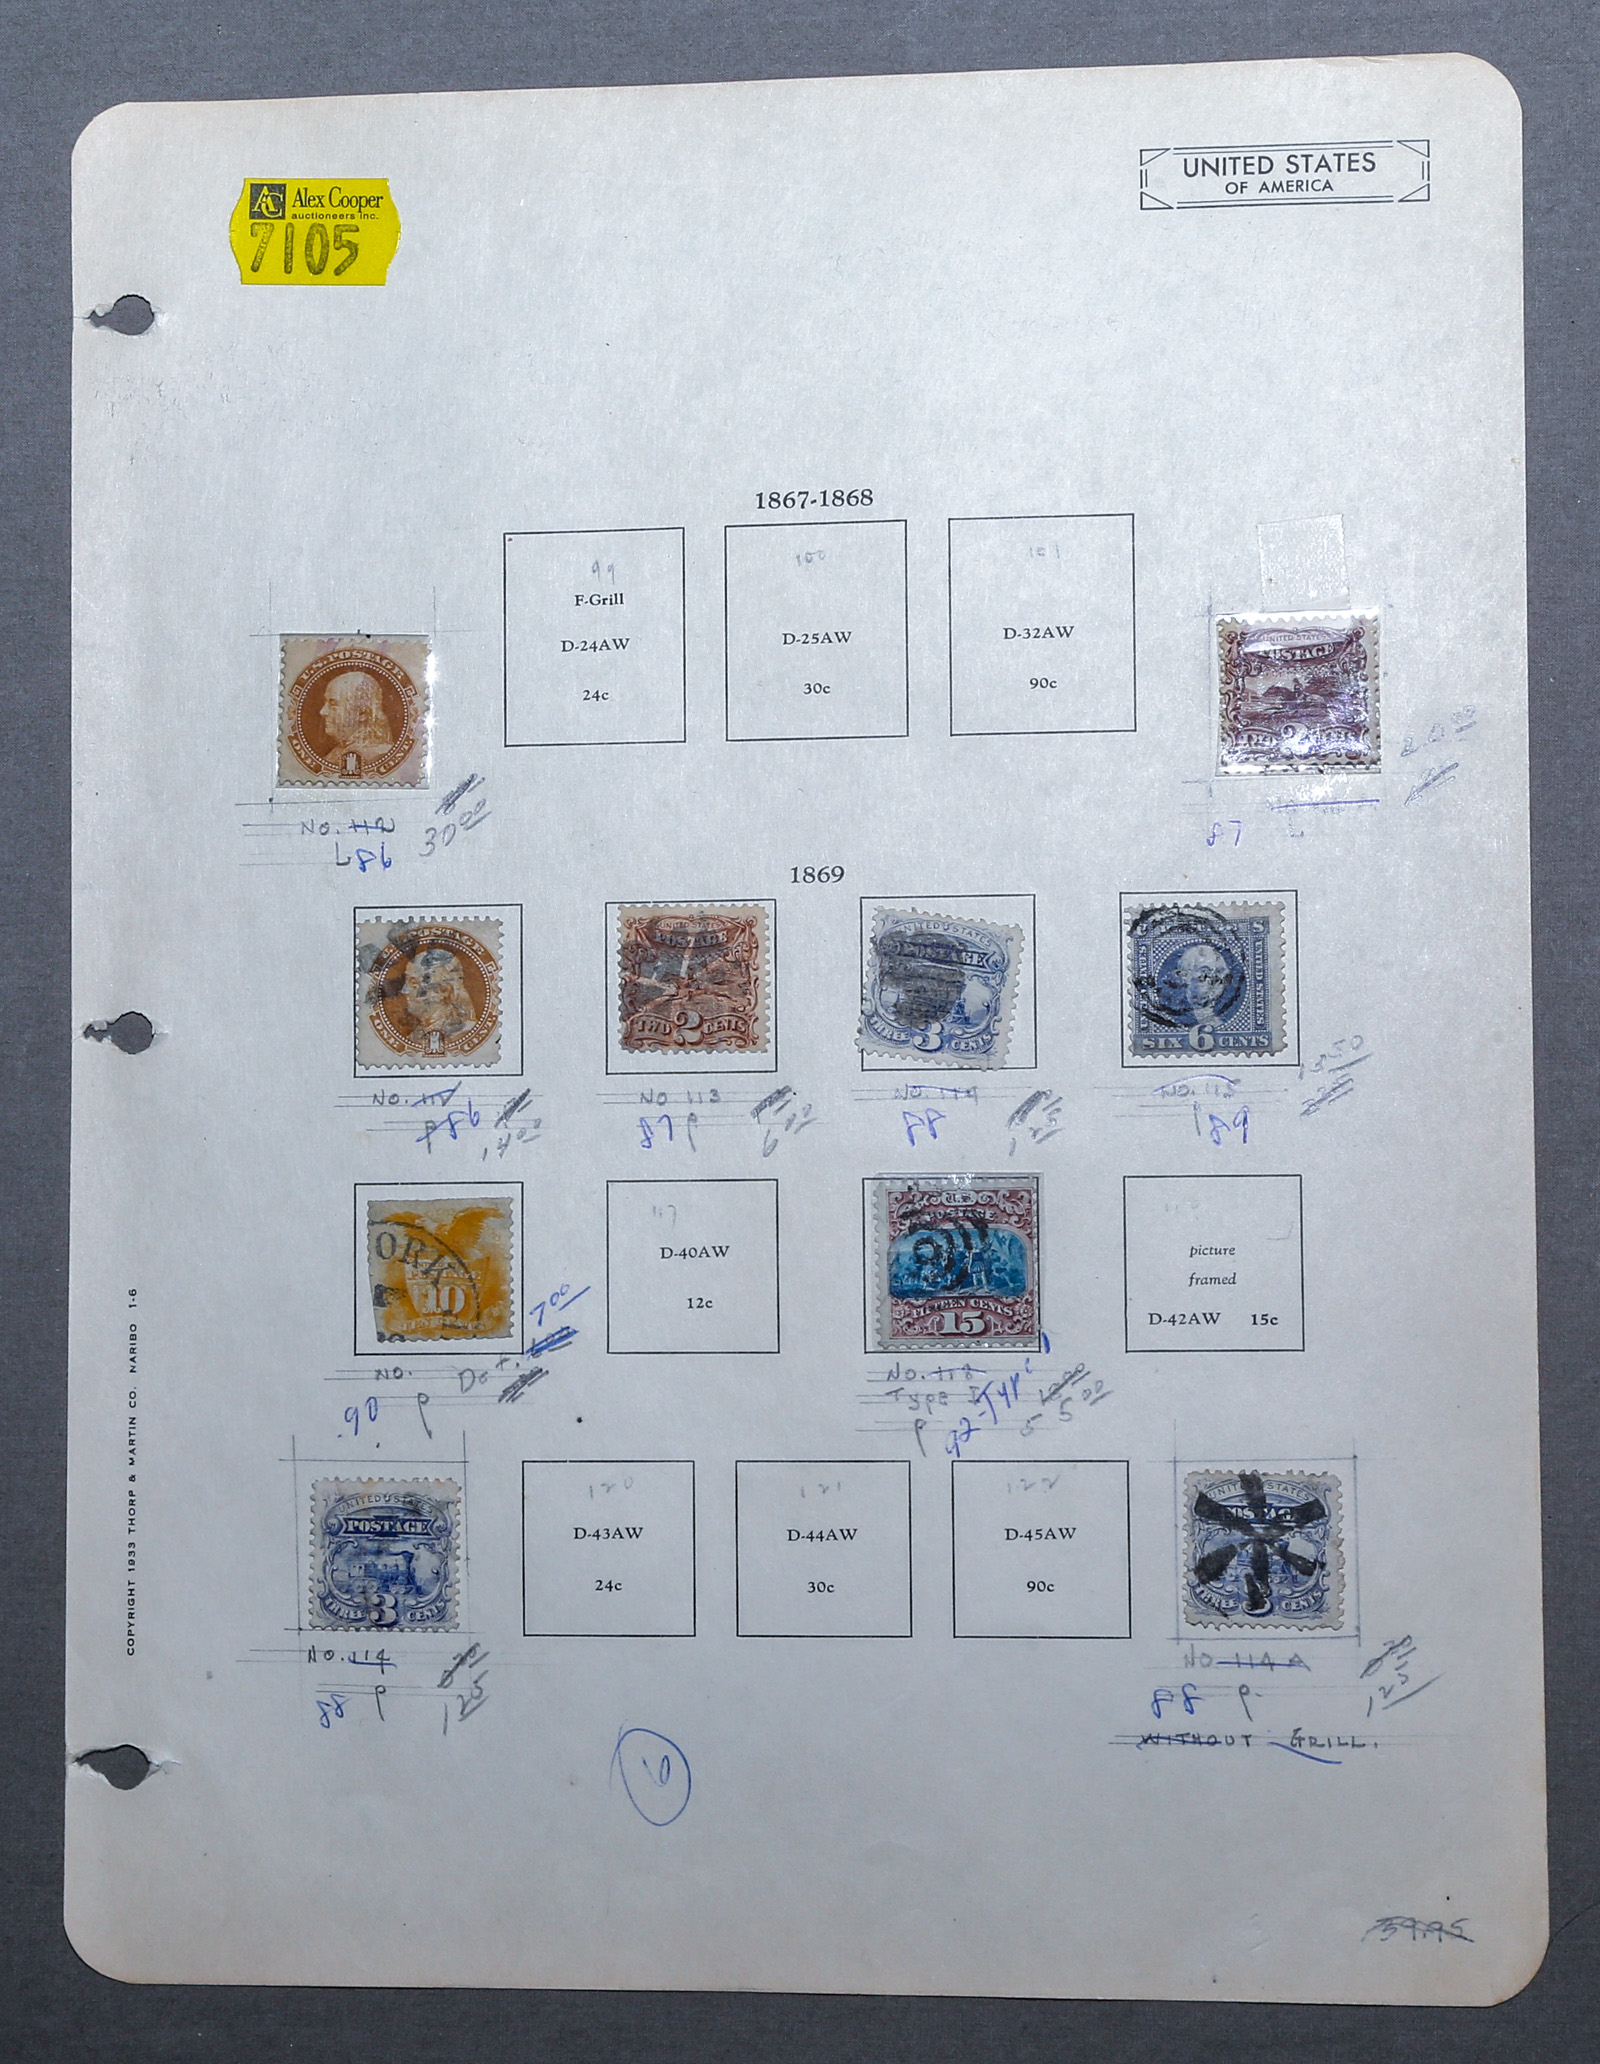 CLASSIC U.S. POSTAGE STAMPS: ISSUE